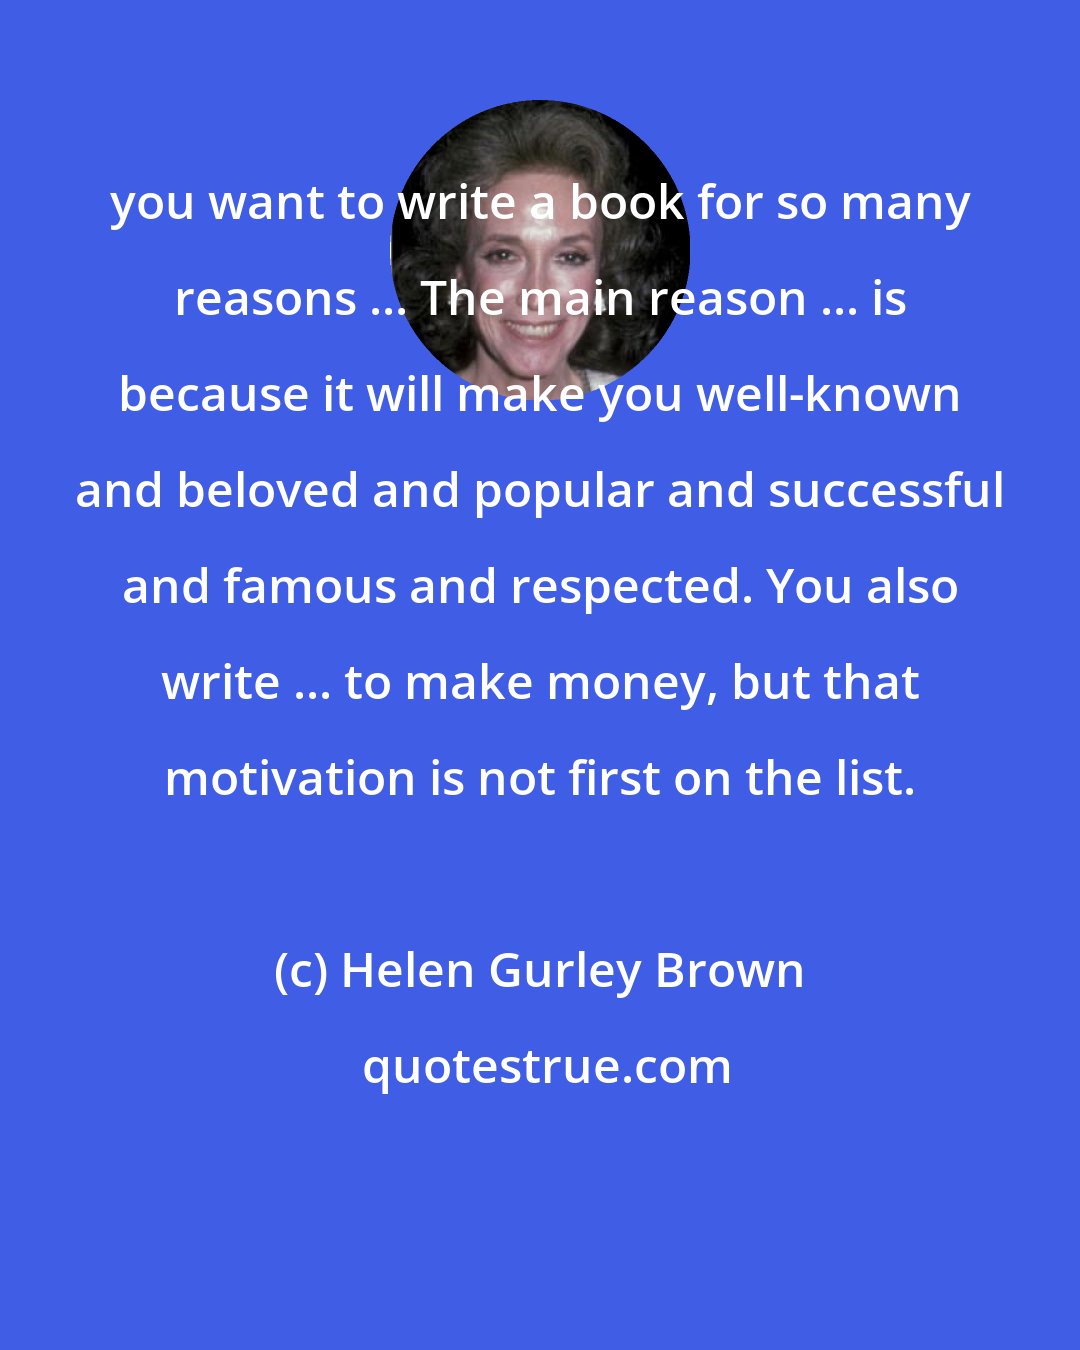 Helen Gurley Brown: you want to write a book for so many reasons ... The main reason ... is because it will make you well-known and beloved and popular and successful and famous and respected. You also write ... to make money, but that motivation is not first on the list.